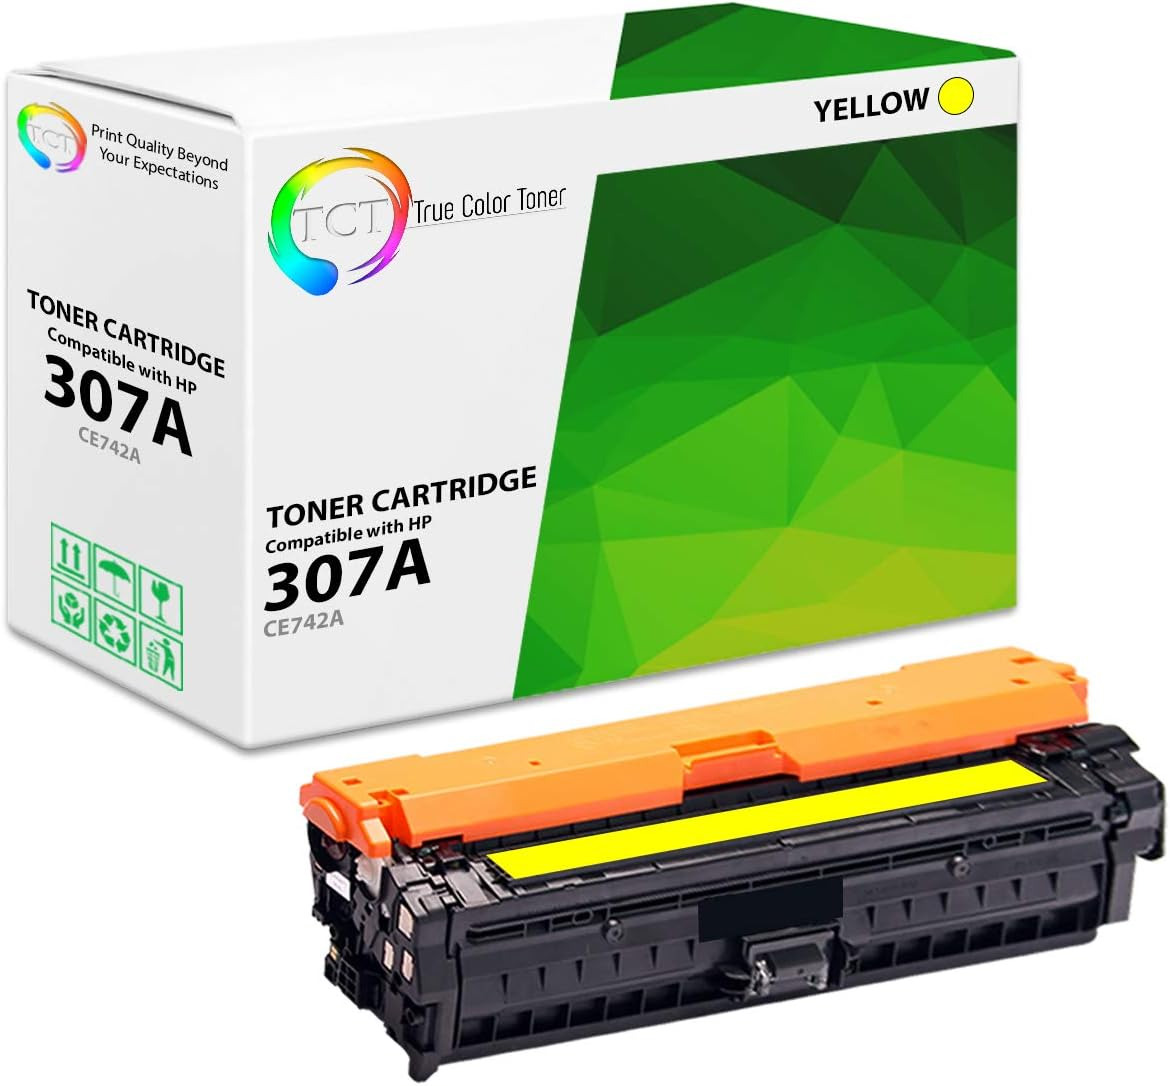 TCT Premium Compatible Toner Cartridge Replacement for HP 307A CE742A Yellow Wor